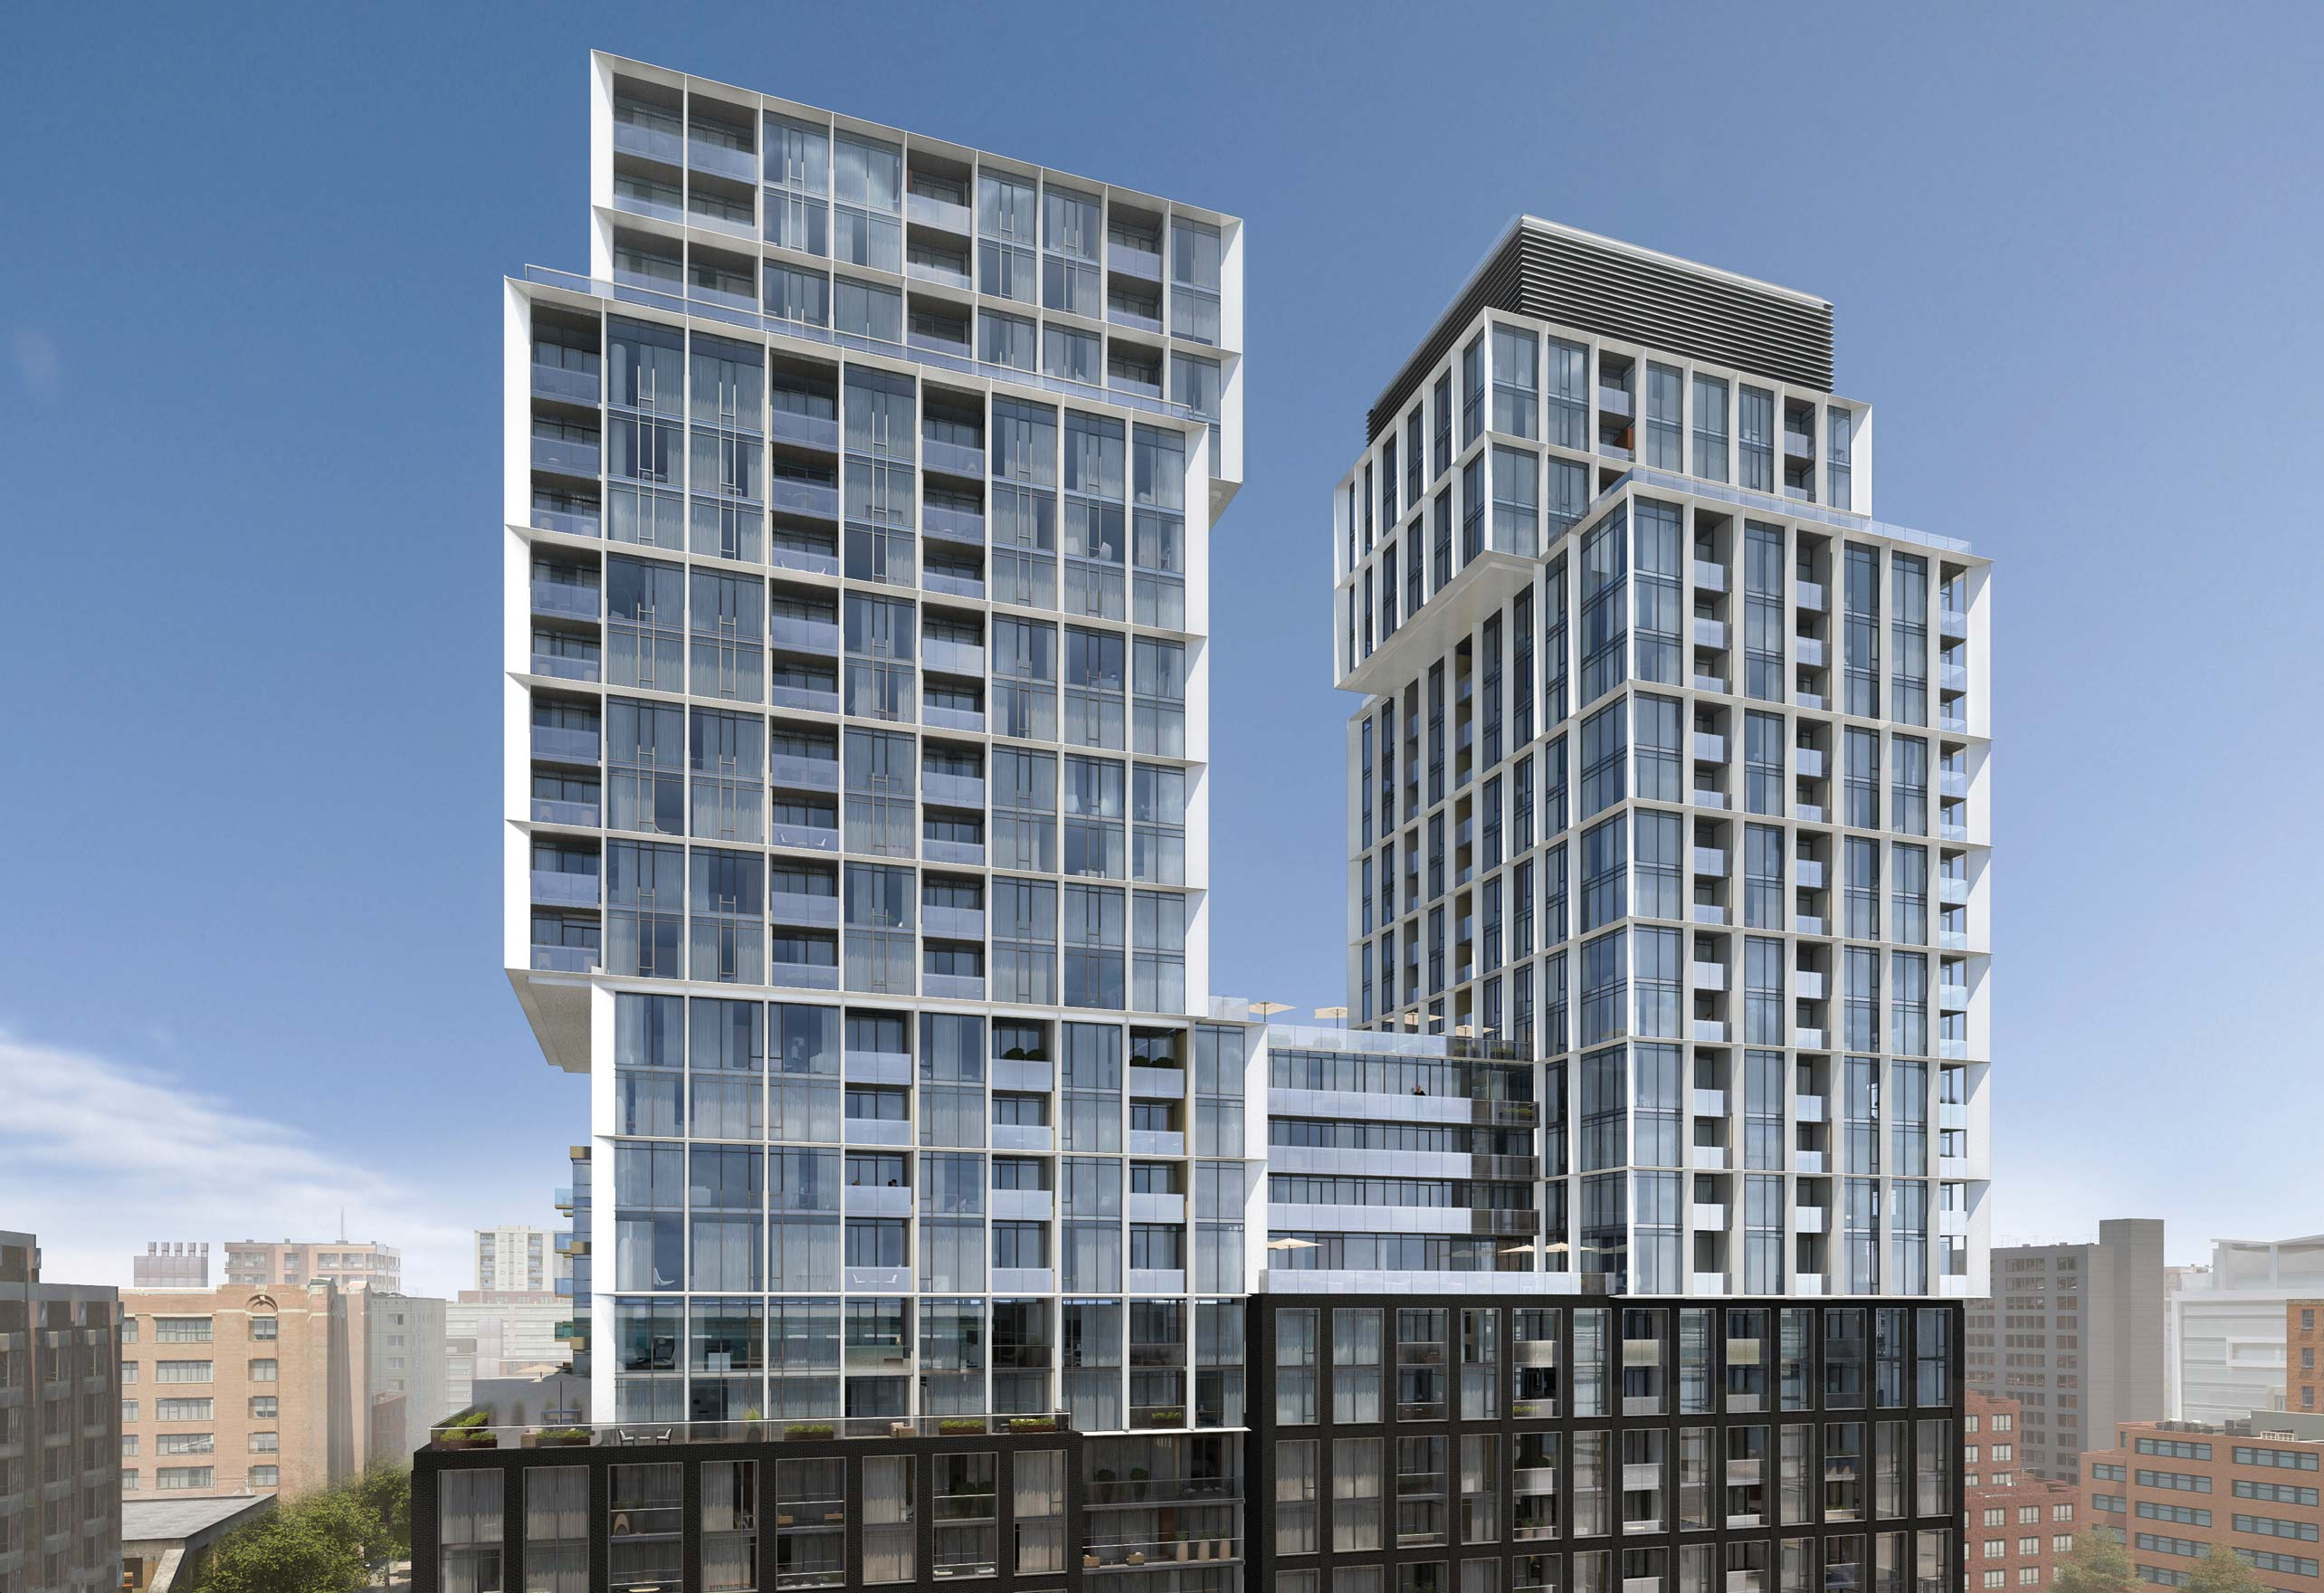 St. Lawrence Condominiums is a new high rise condo complex by Cityzen and Fernbrook Homes located in 158 Front St E, Toronto.